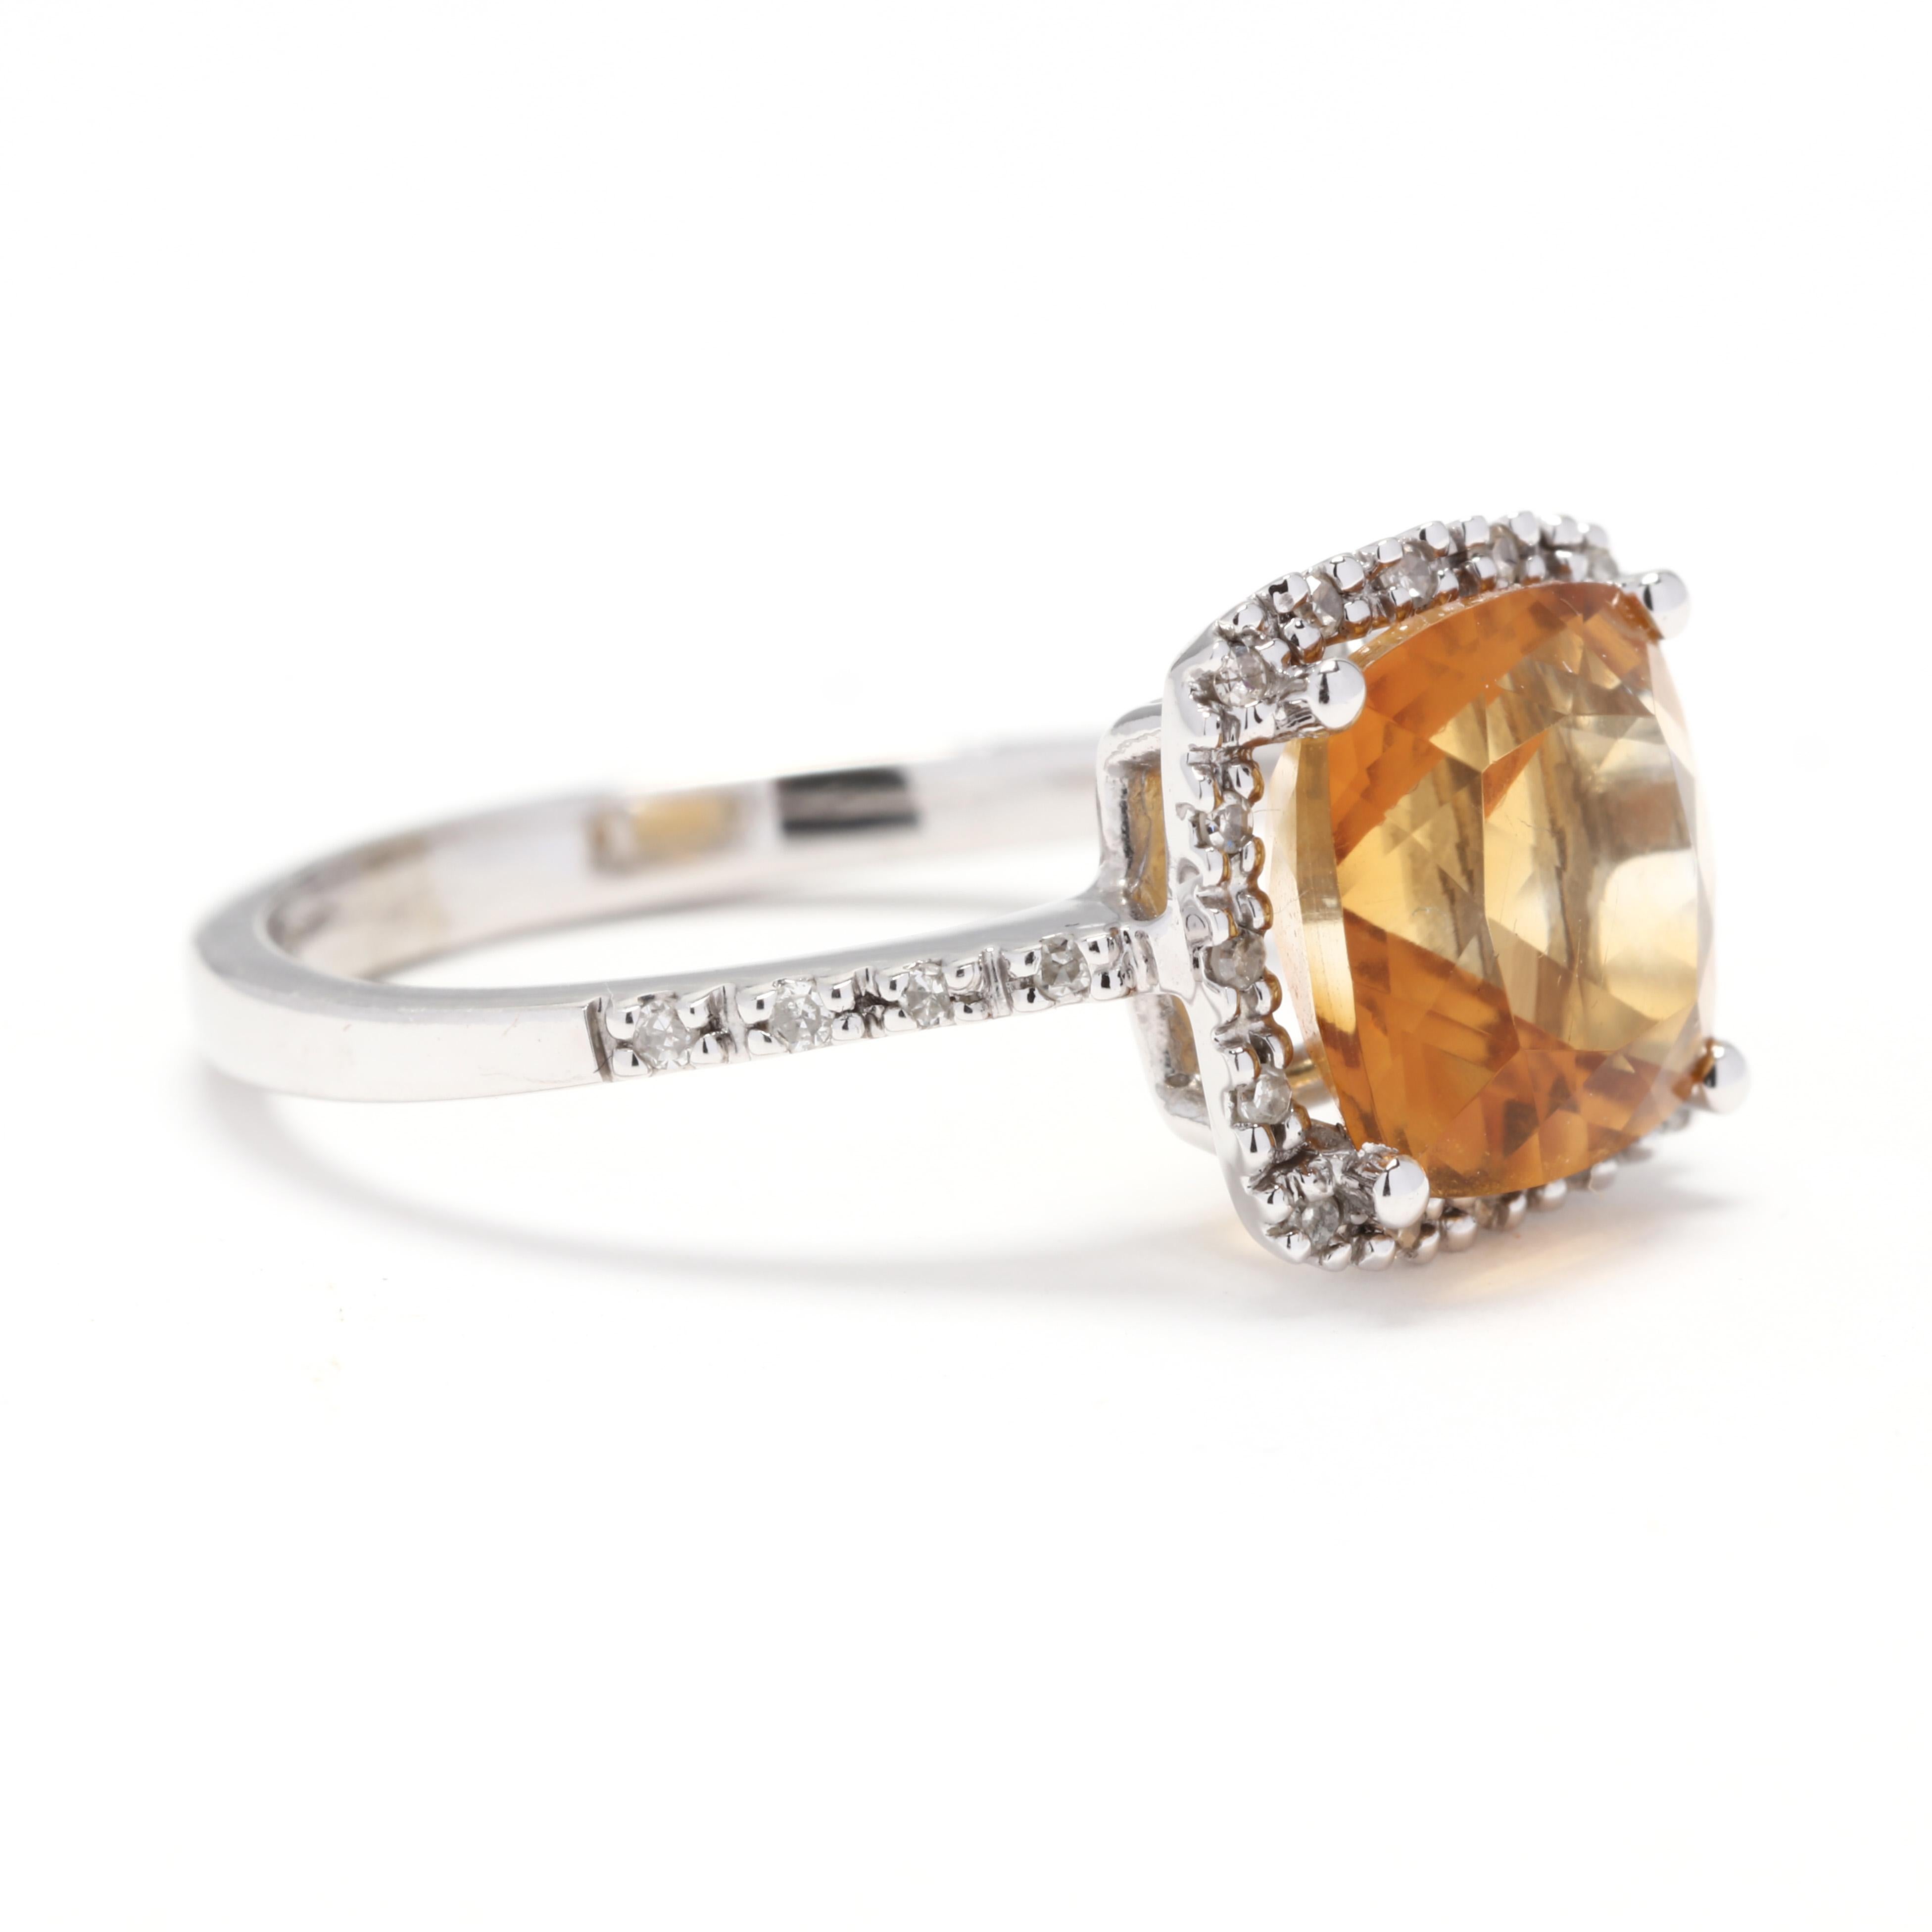 A 14 karat white gold, citrine and diamond halo ring. This ring is centered on a cushion cut citrine weighing approximately 1.95 carats, surrounded by a halo of diamonds and with diamonds down a thin band weighing approximately .10 total